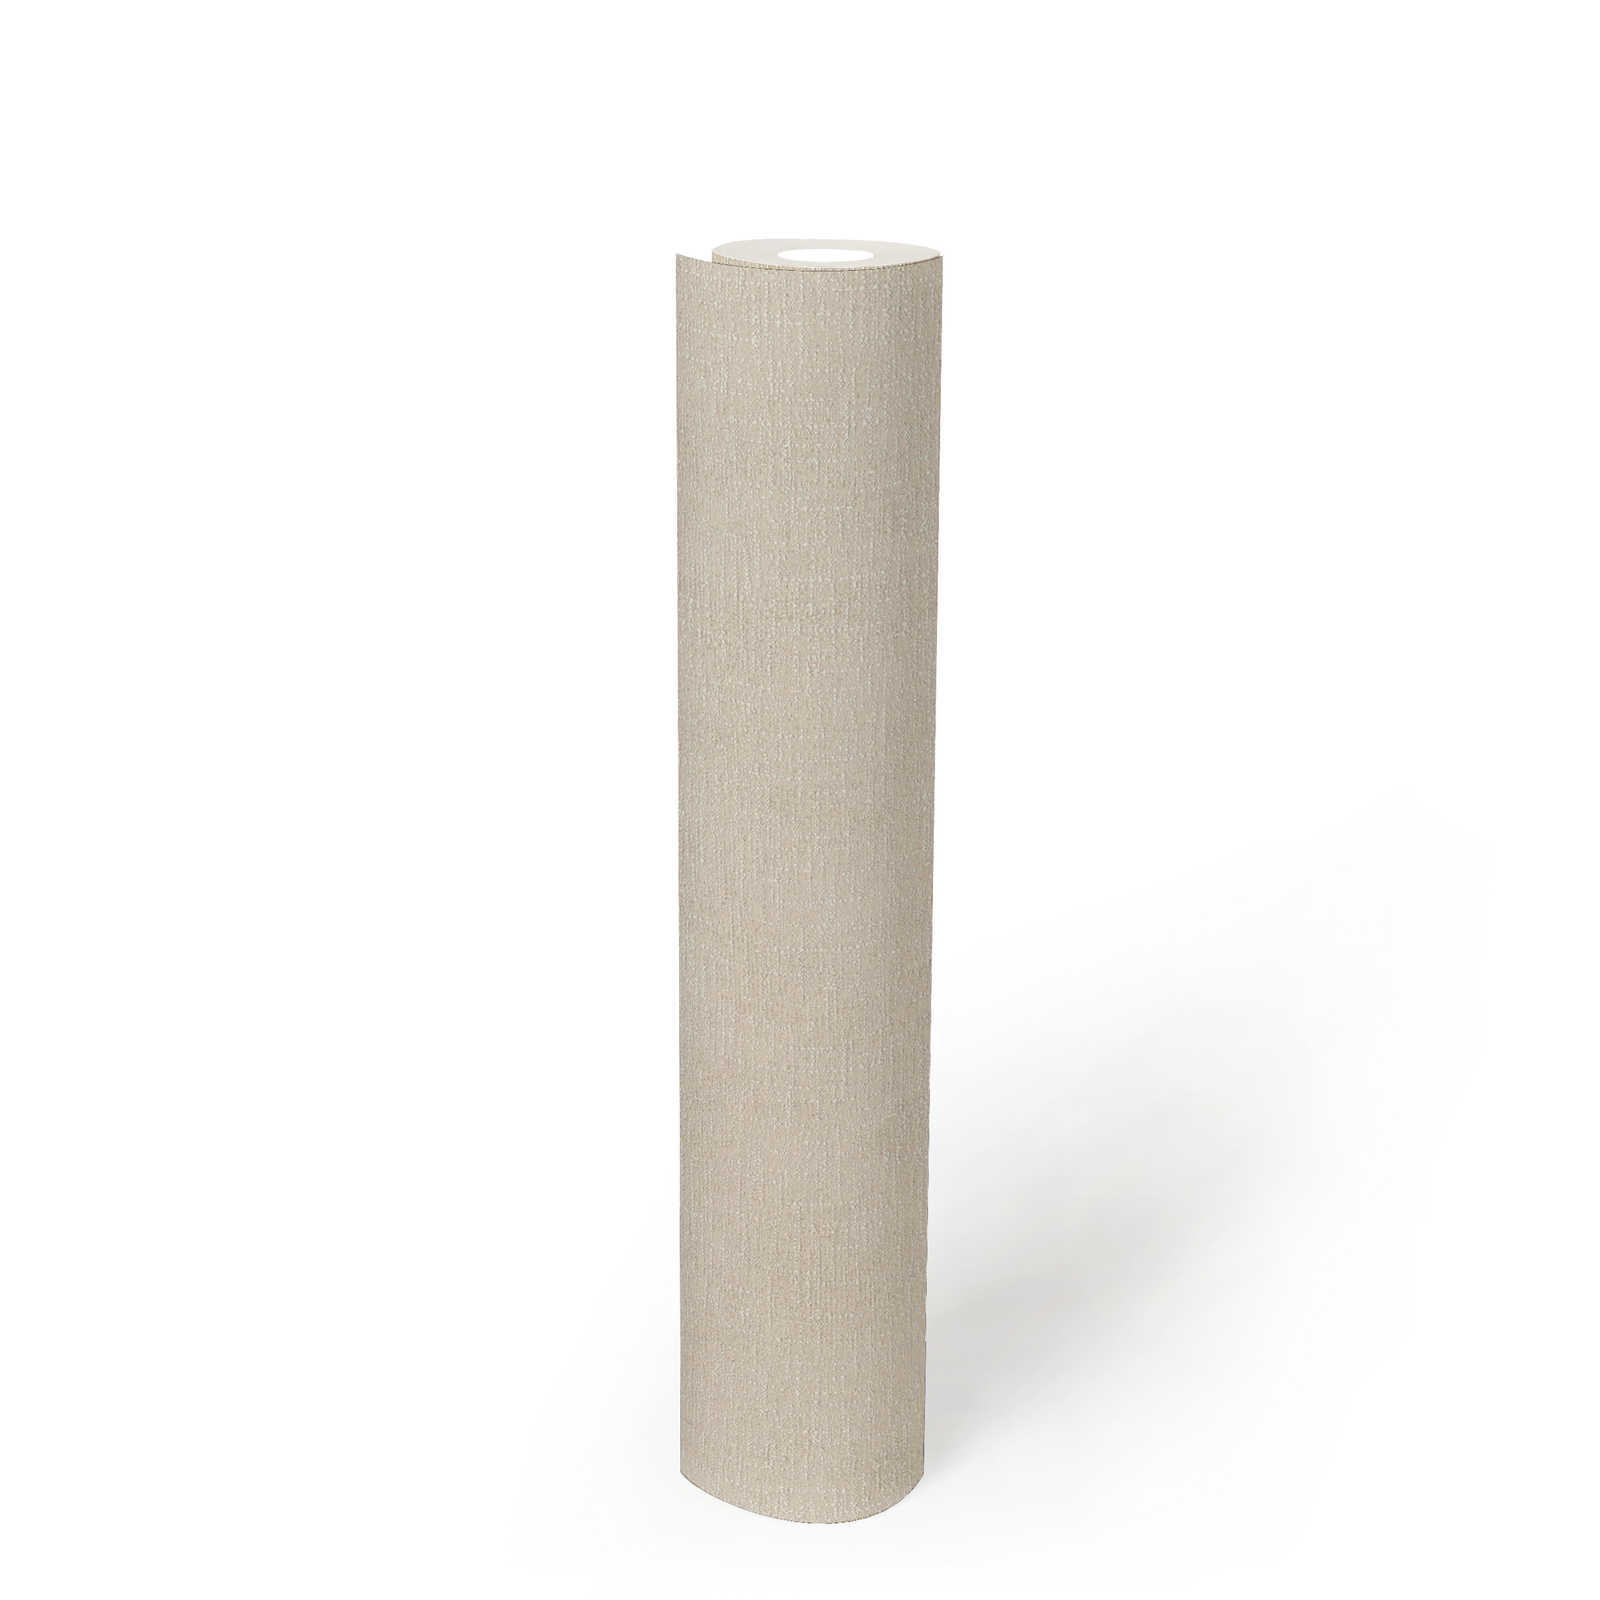             Wallpaper cream white with textile optics & shimmer effect - beige
        